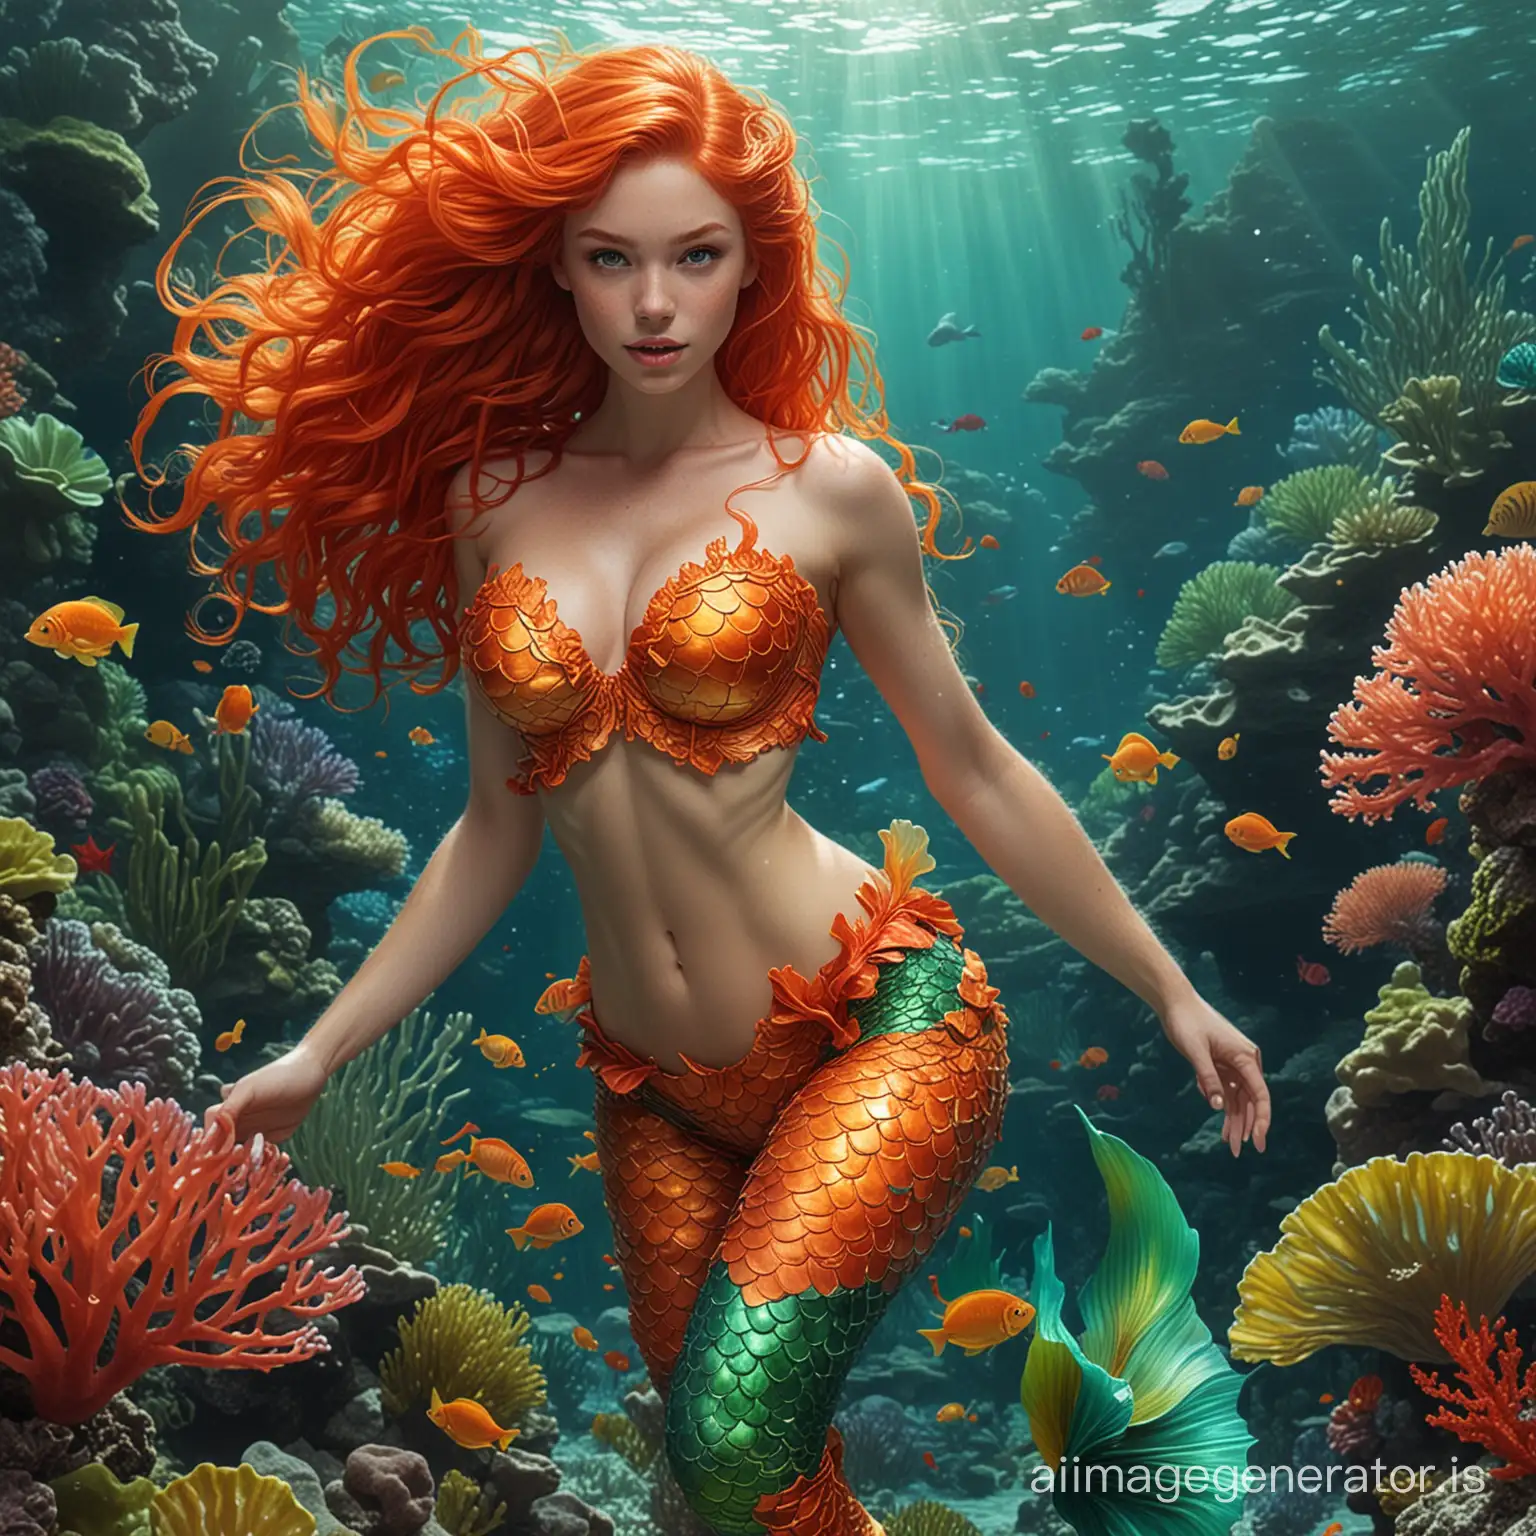 A ginger mermaid has a red tail with green veins her crop bustier was red orange and she was swimming between the corals